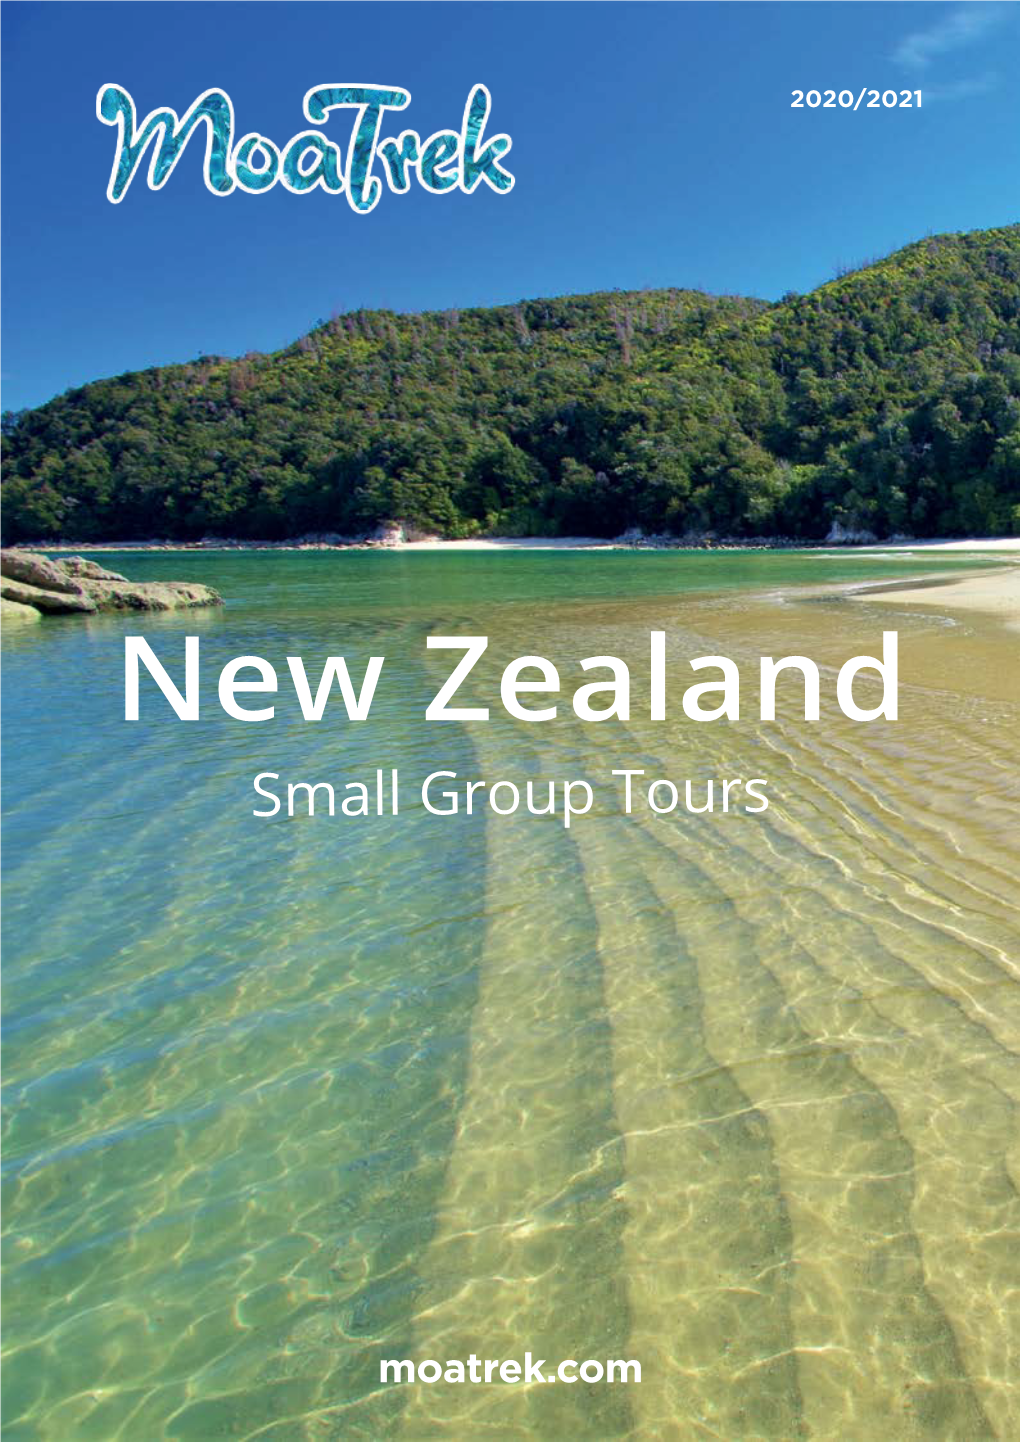 Small Group Tours